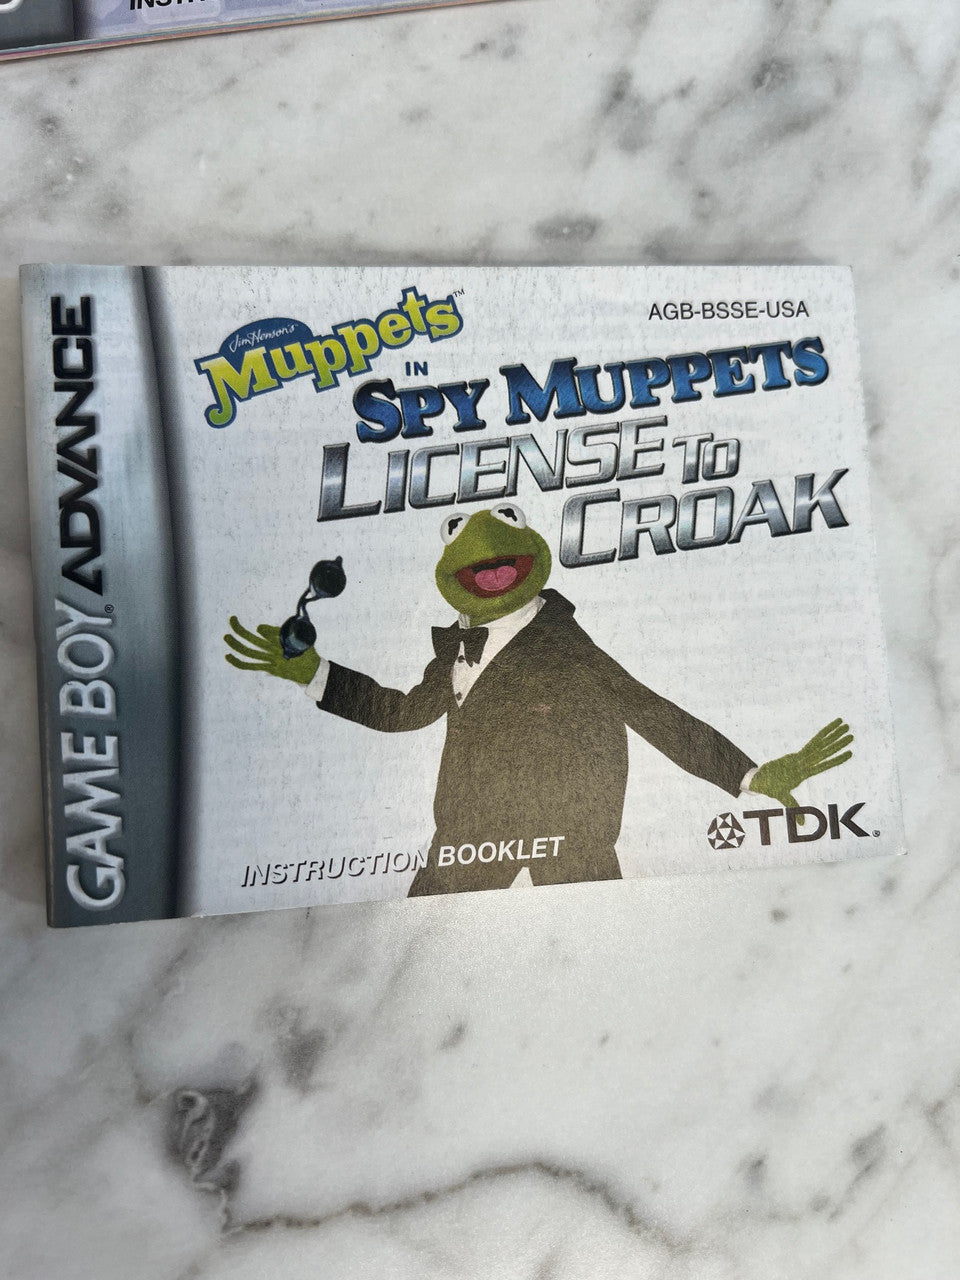 Muppets in Spy Muppets License to Croak Gameboy Advance manual only